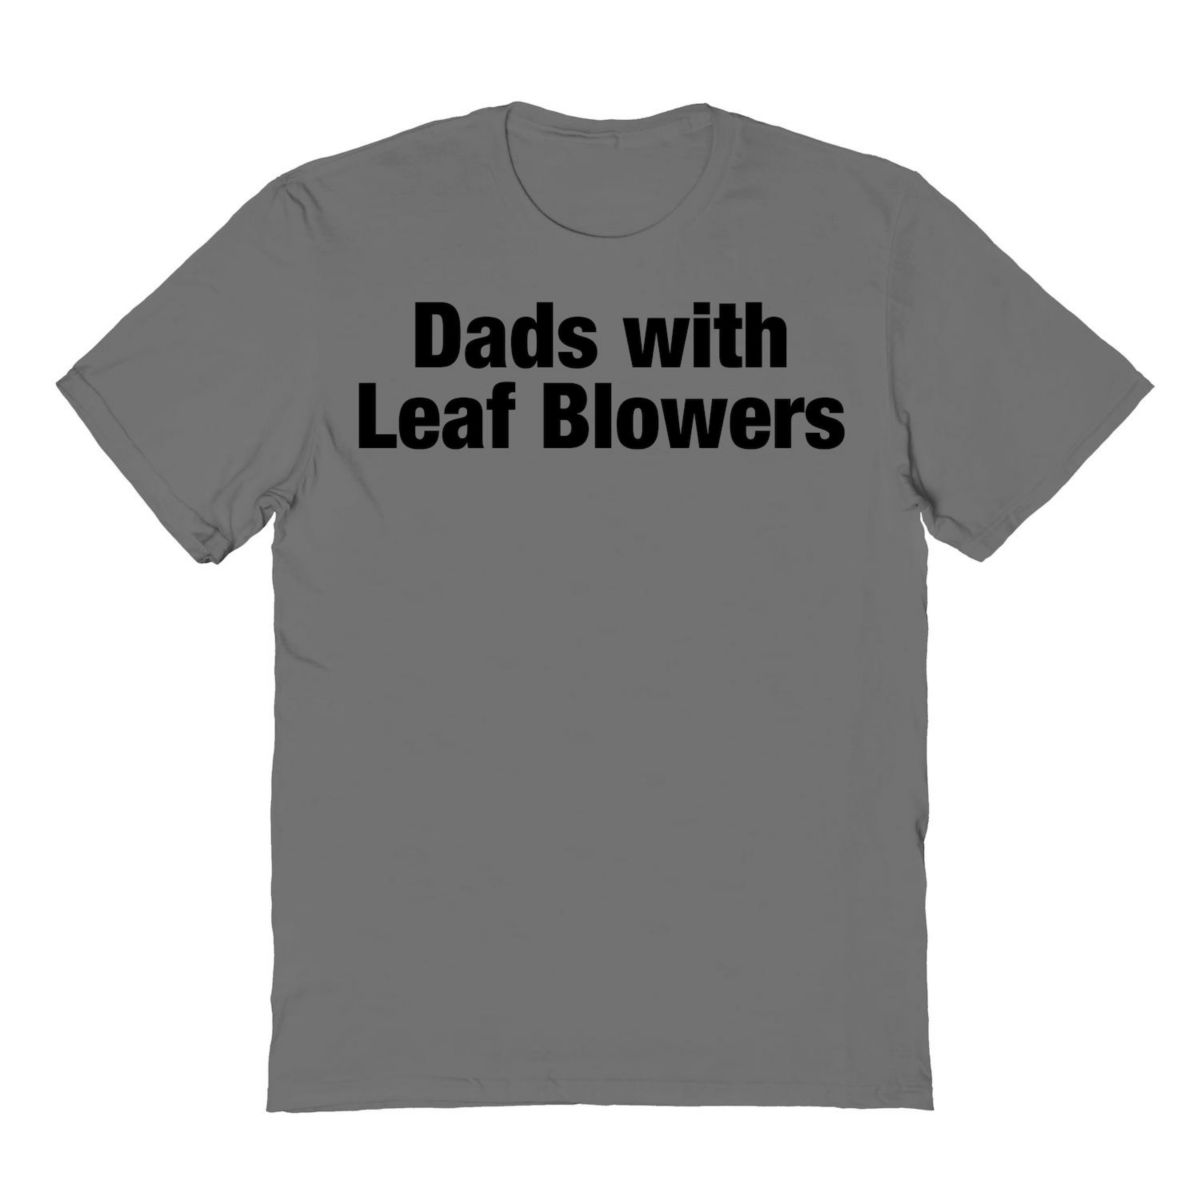 Men's COLAB89 by Threadless Dads With Leaf Blowers Father's Day Graphic Tee COLAB89 by Threadless